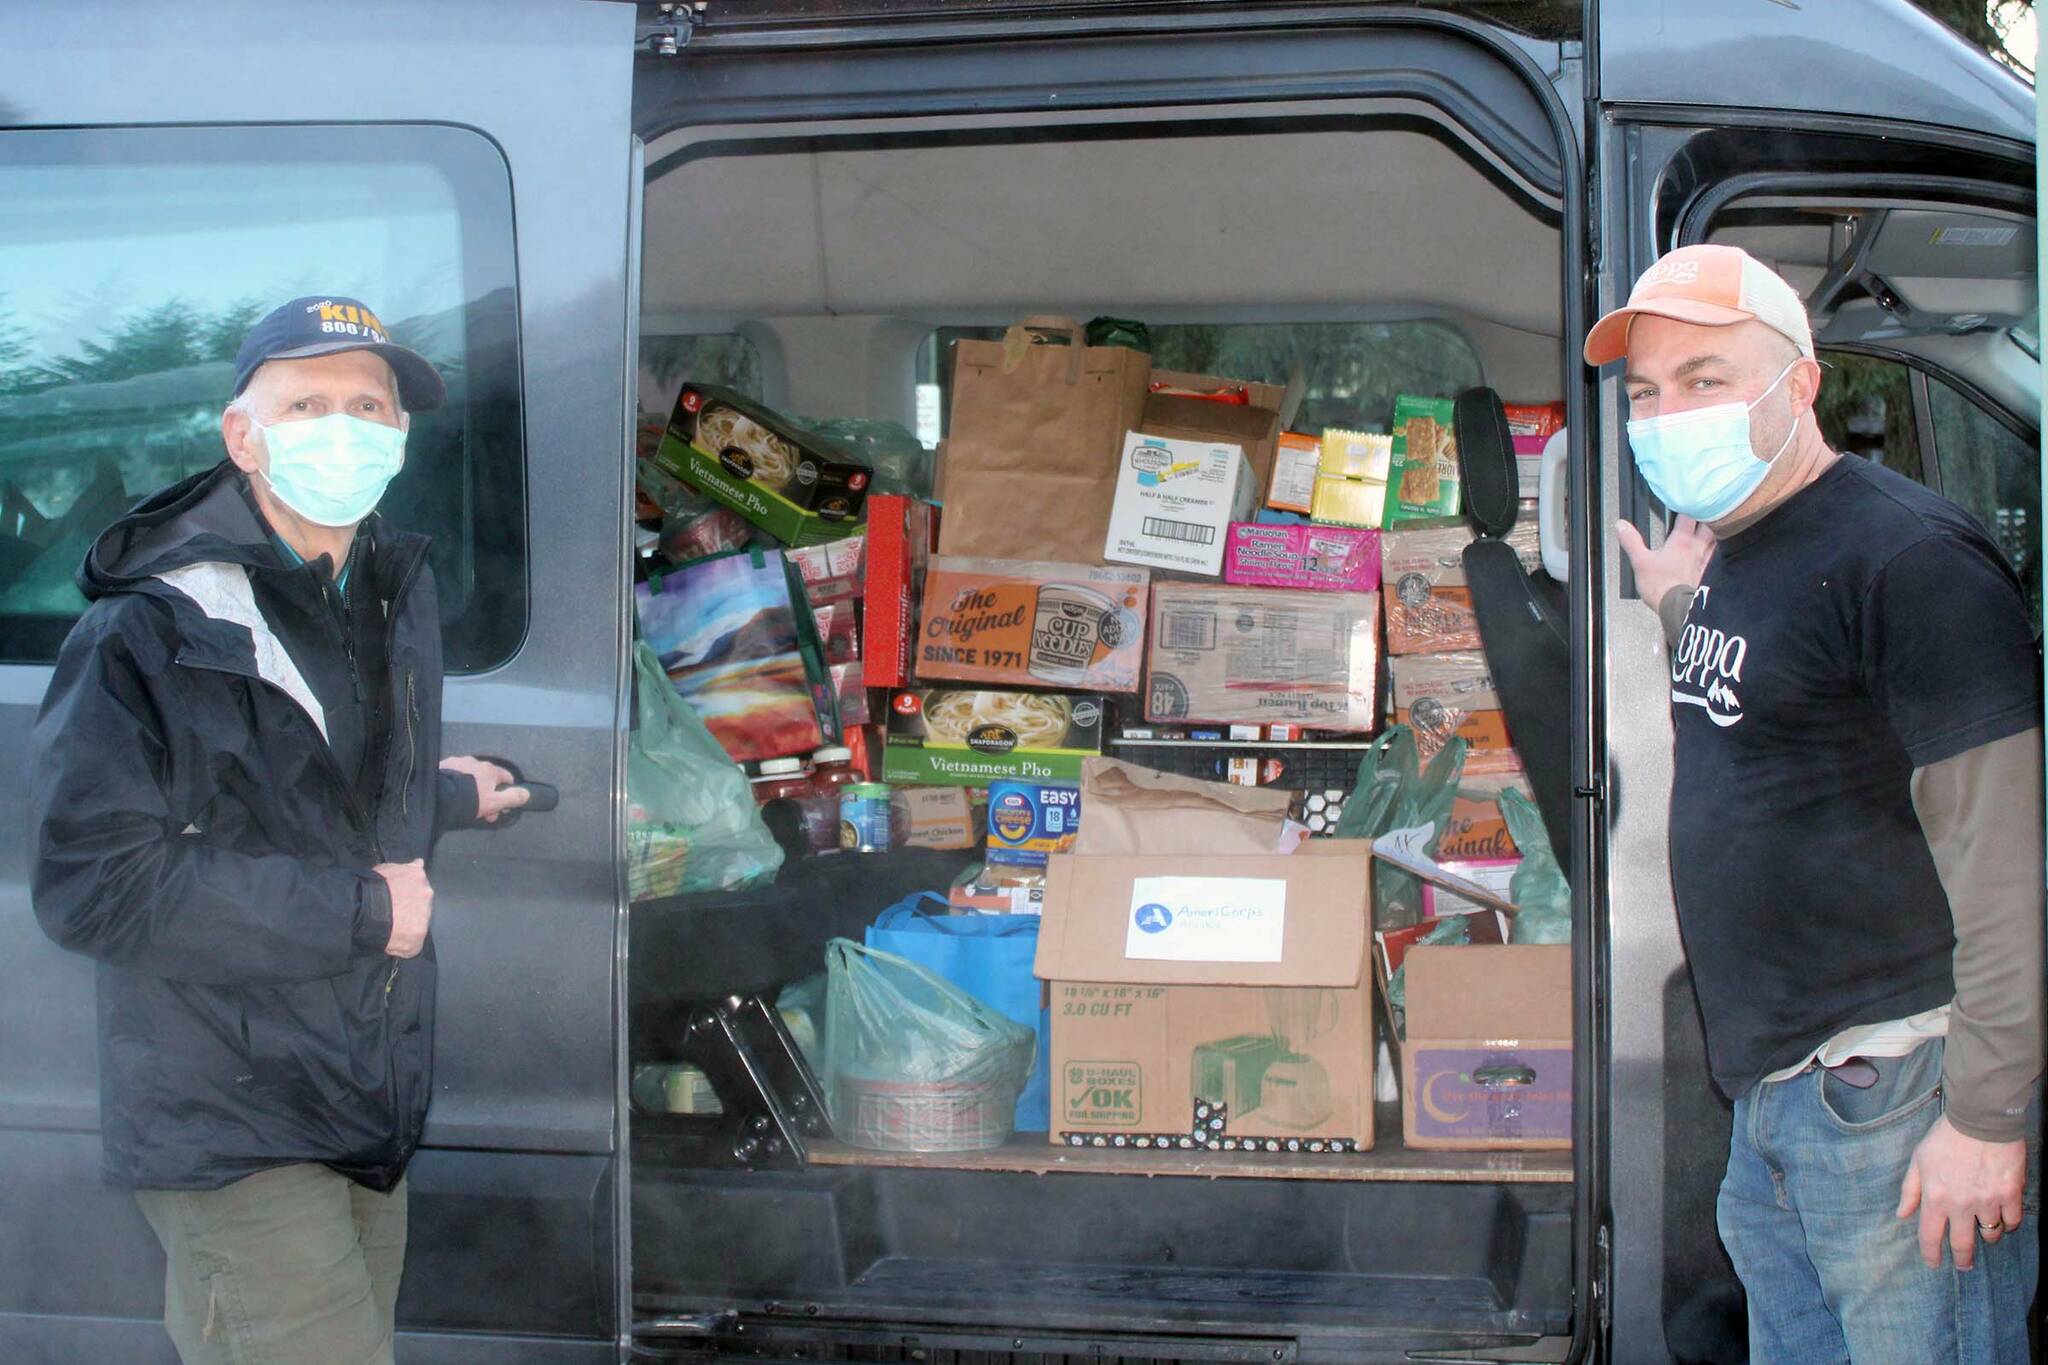 Mike Ricker and Marc Wheeler load donated food items into a van bound for the Glory Hall on Jan. 17. The items were donated as part of a drive to collect food and household goods in honor of Martin Luther King Jr. Day. (Dana Zigmund / Juneau Empire)